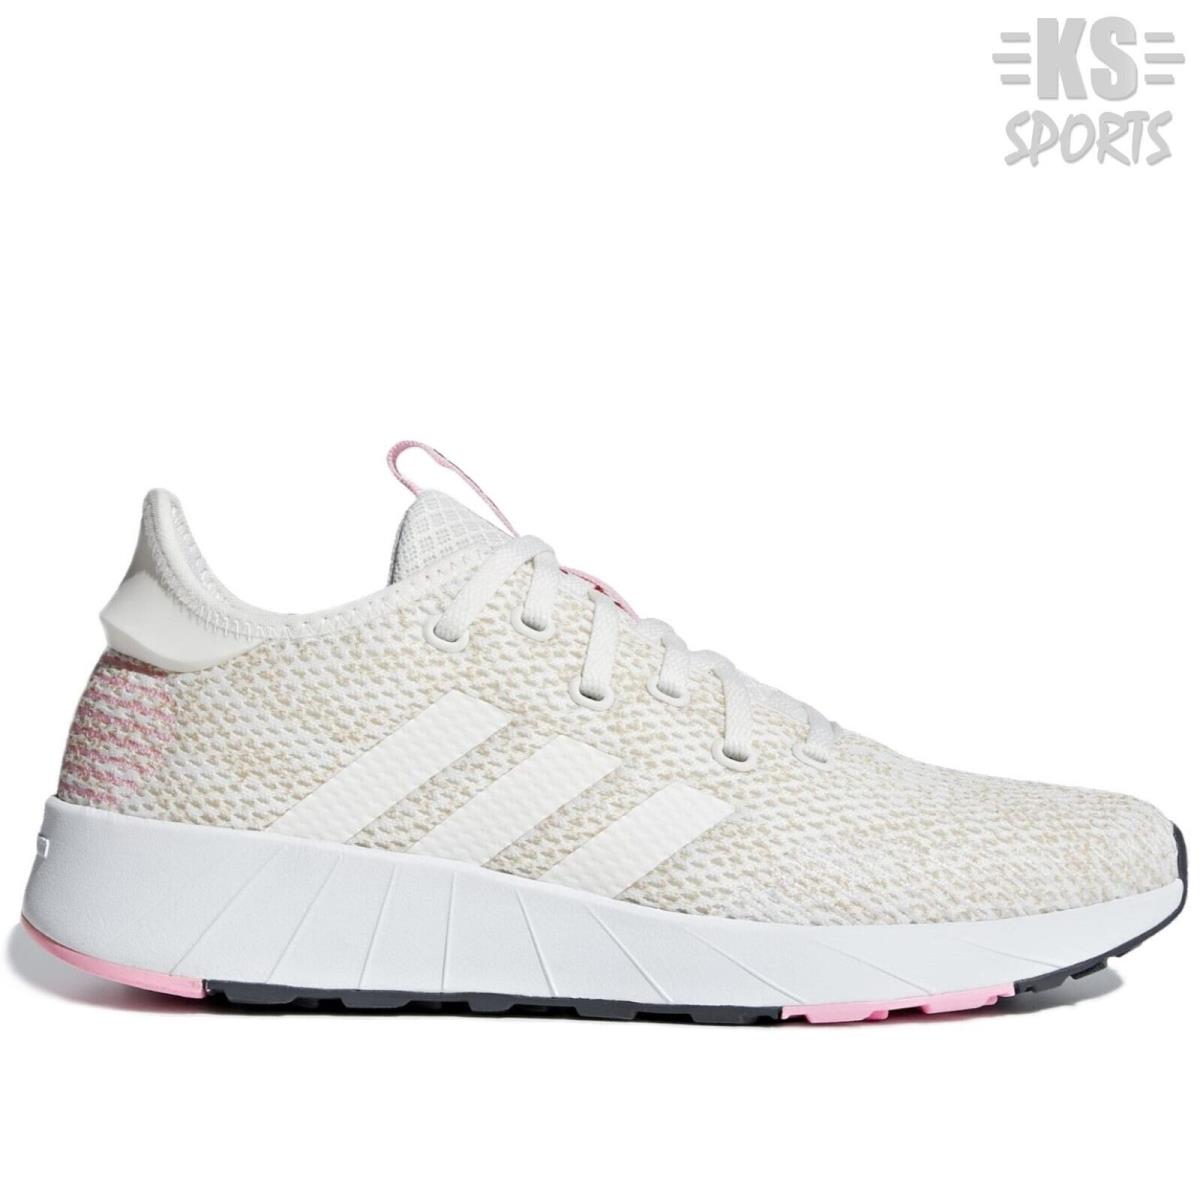 Adidas Questar X Byd `white Pale Nude` Women`s Running Shoes F34667